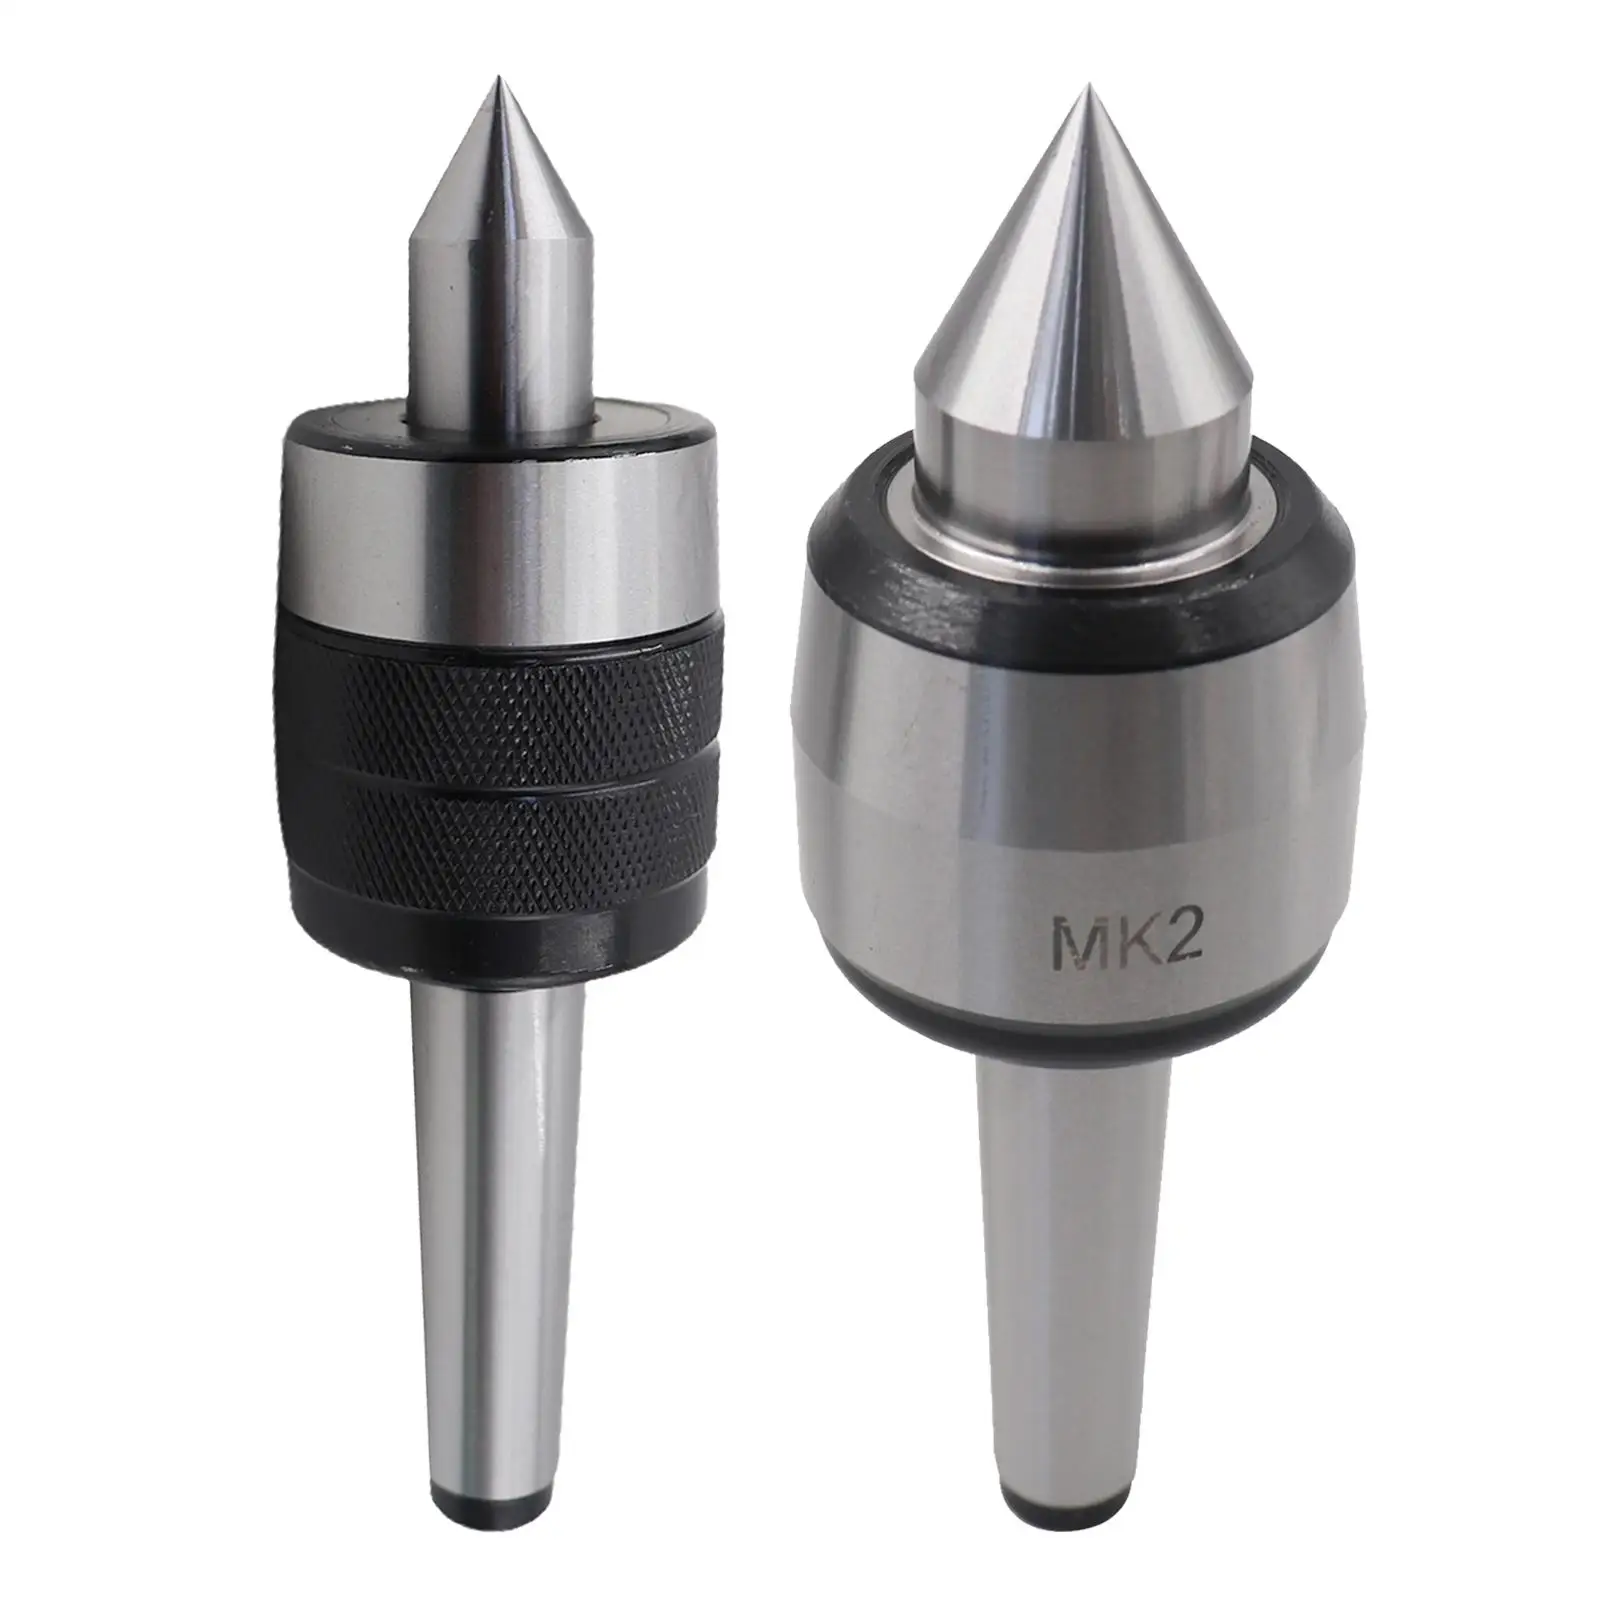 1pcs Live Milling Center for Lathe Machine Tool Accessory Milling Center Taper